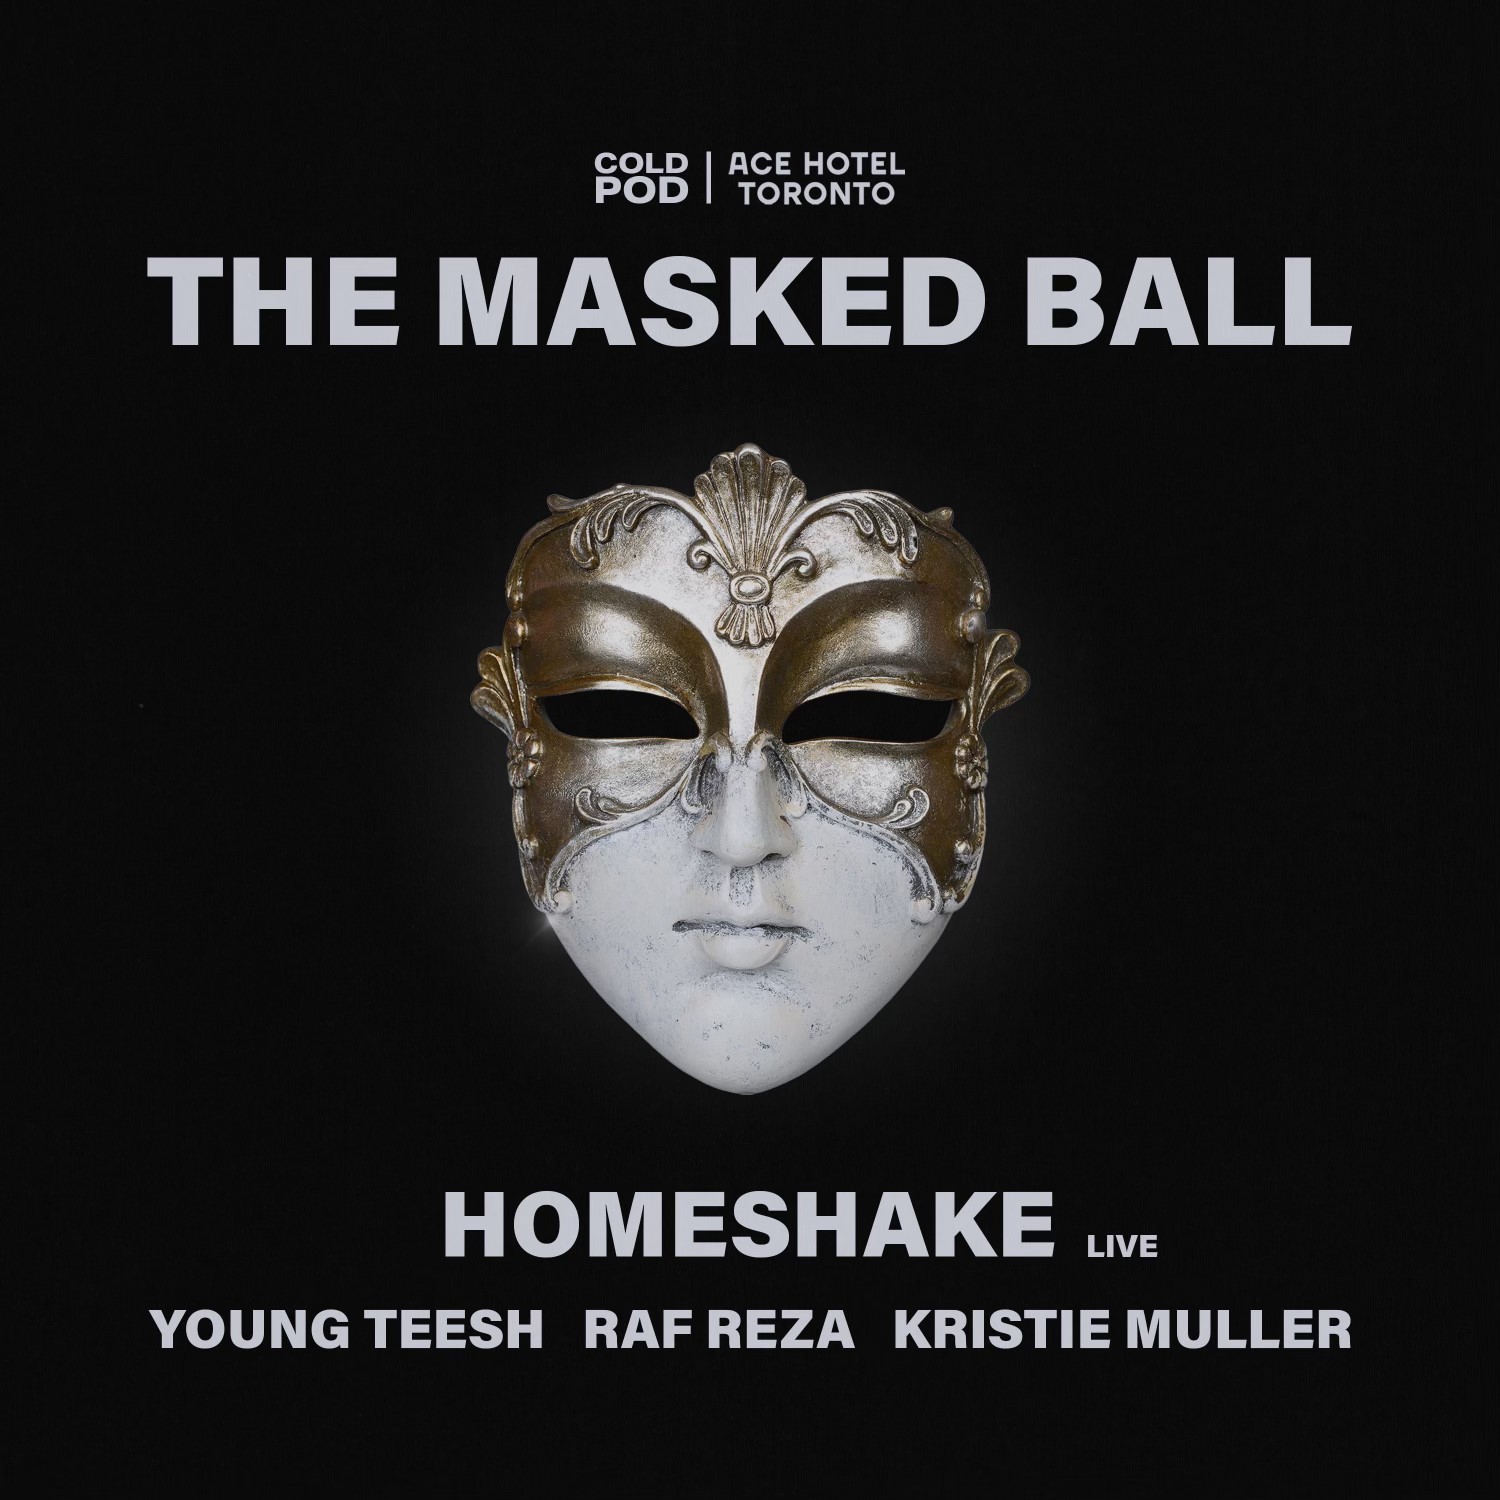 The Masked Ball event featuring Homeshake, Young Teesh, Raf Reza, Kristie Muller